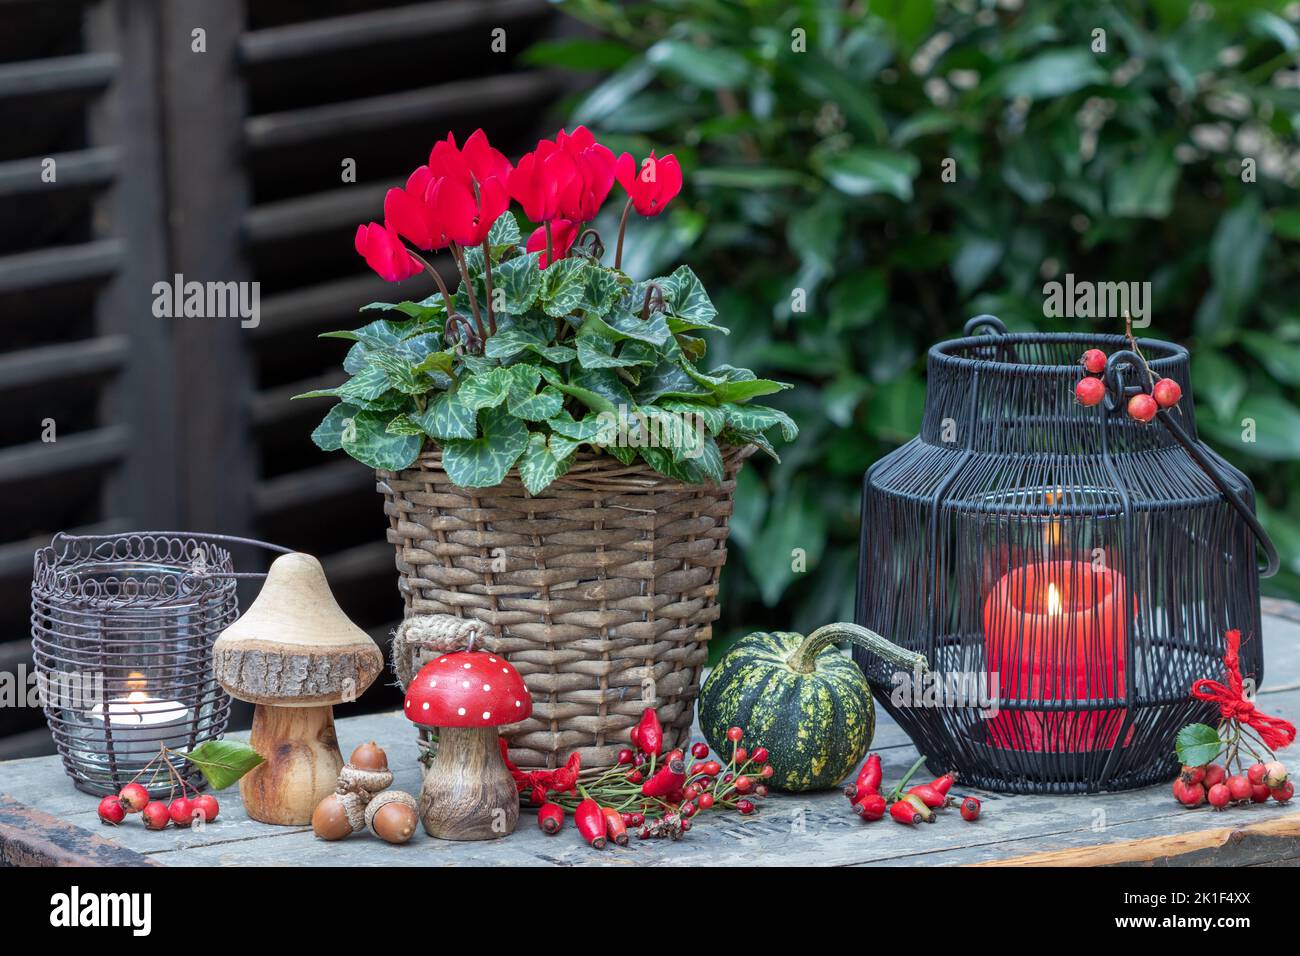 autumn arrangement with red cyclamen flower in basket and lanterns Stock Photo